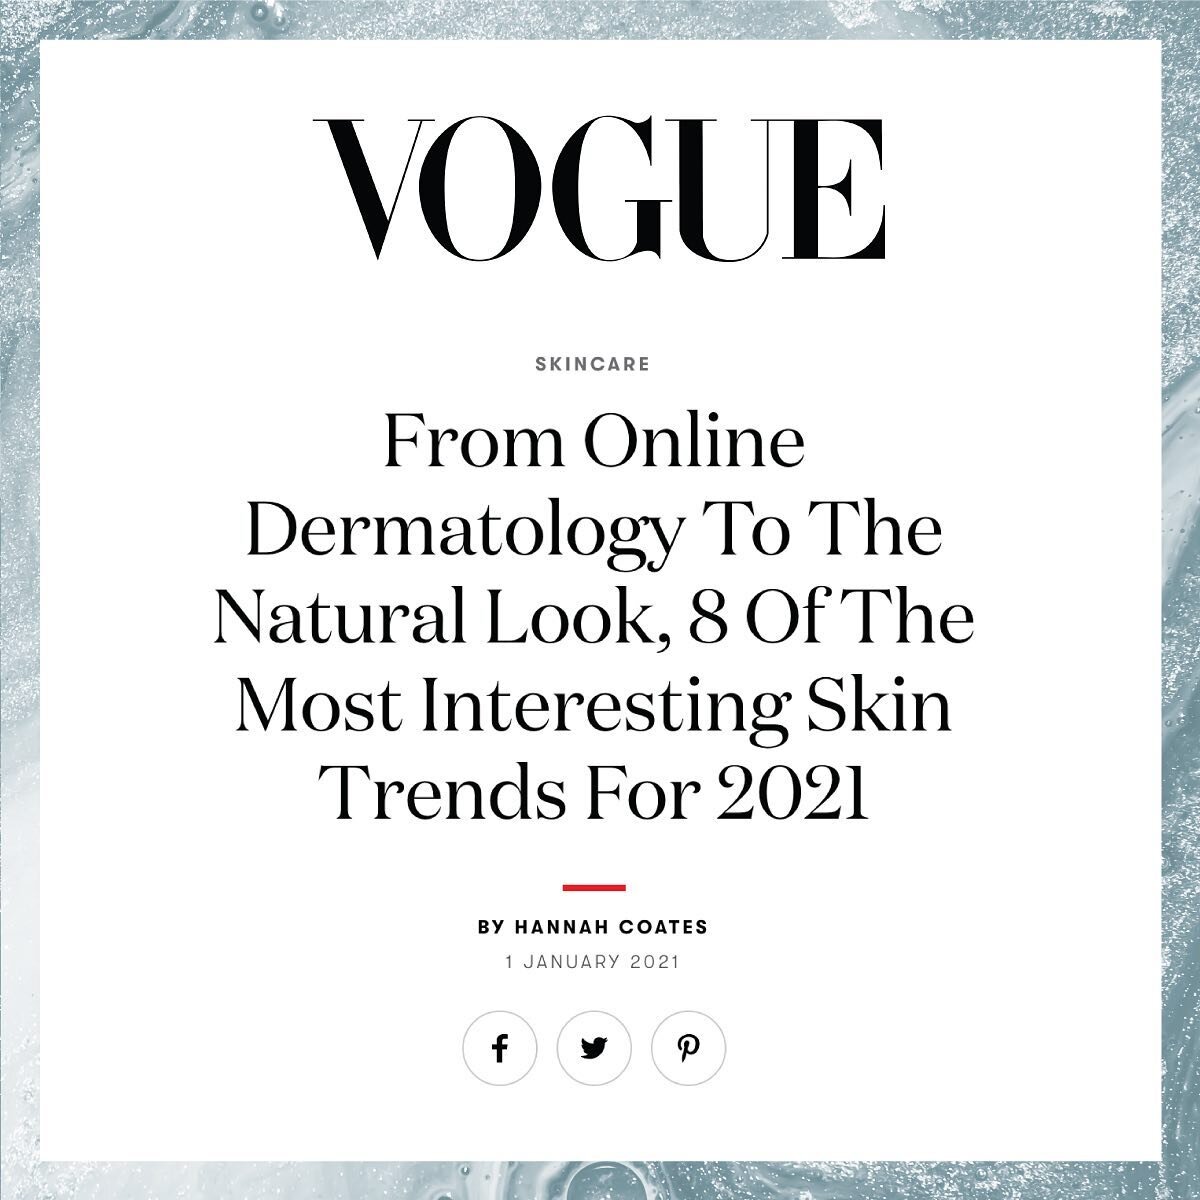 @dr_jana talk about Light Eyes in @britishvogue this month.  Make sure you follow and contact @malluccilondon @dr_jana for Light Eyes treatments in London 🤍🤍 #lighteyes #plantextracts🍃🌿 #refreshing, #biostimulation, #beauty, #skin, #eyes #youthfu